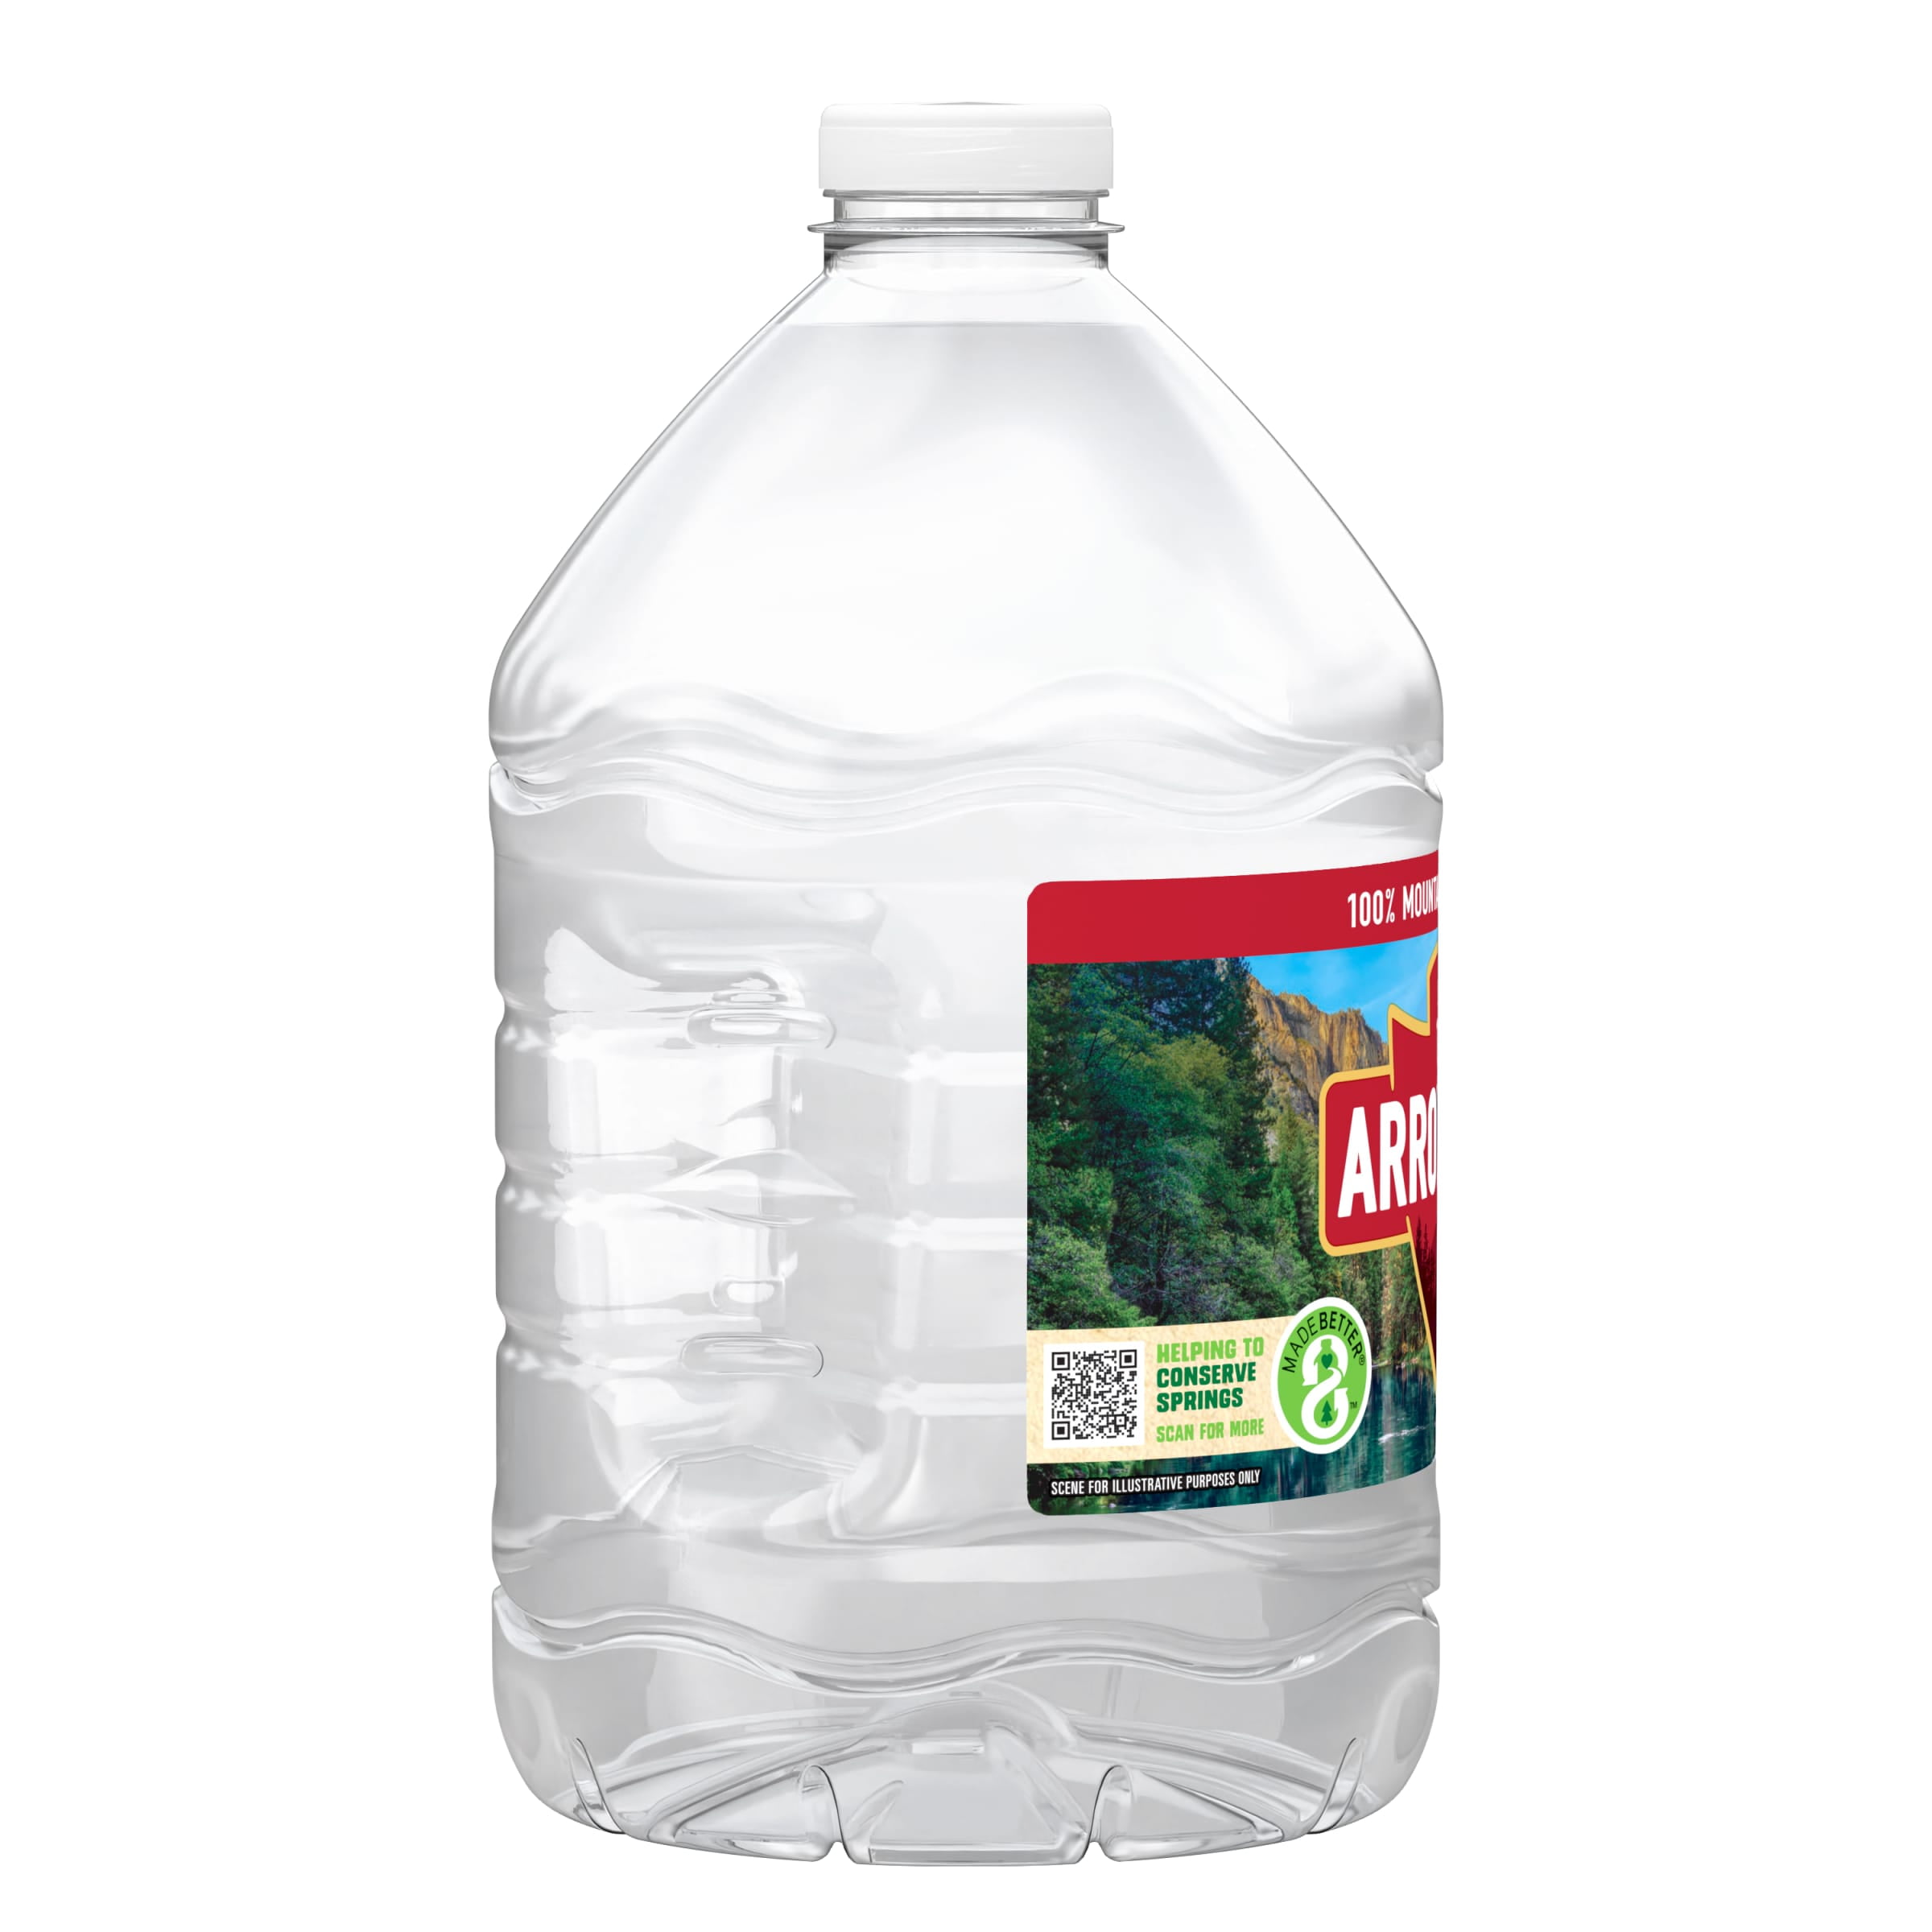 The Water Bottle of the Future - The Arrowhead